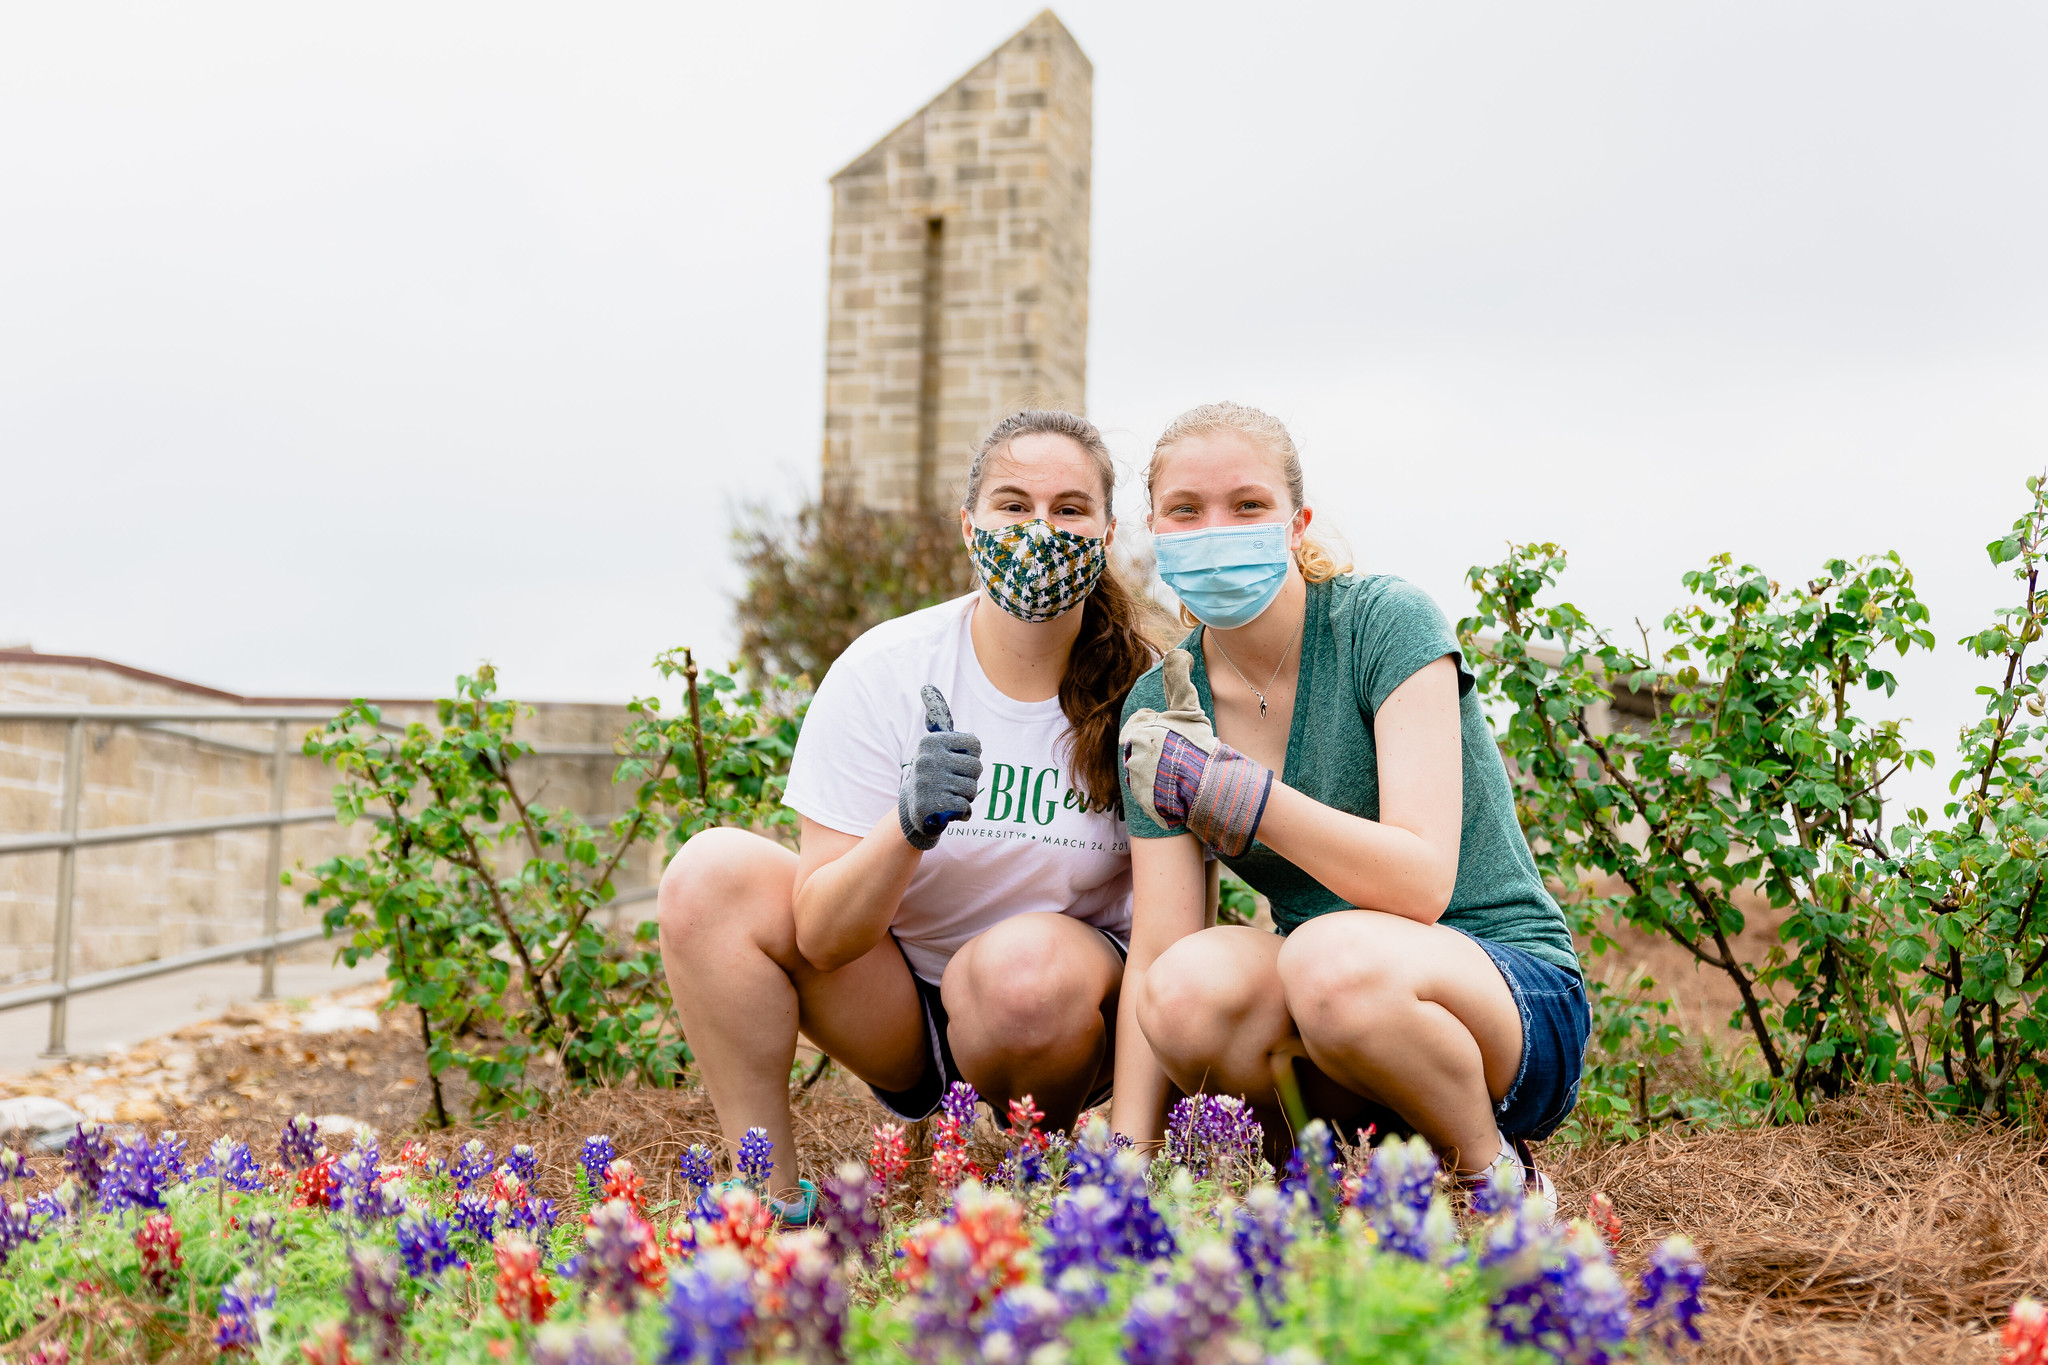 Two students wearing face coverings and gardening gloves stop to gig 'em in the middle of tending to a bluebonnet field.